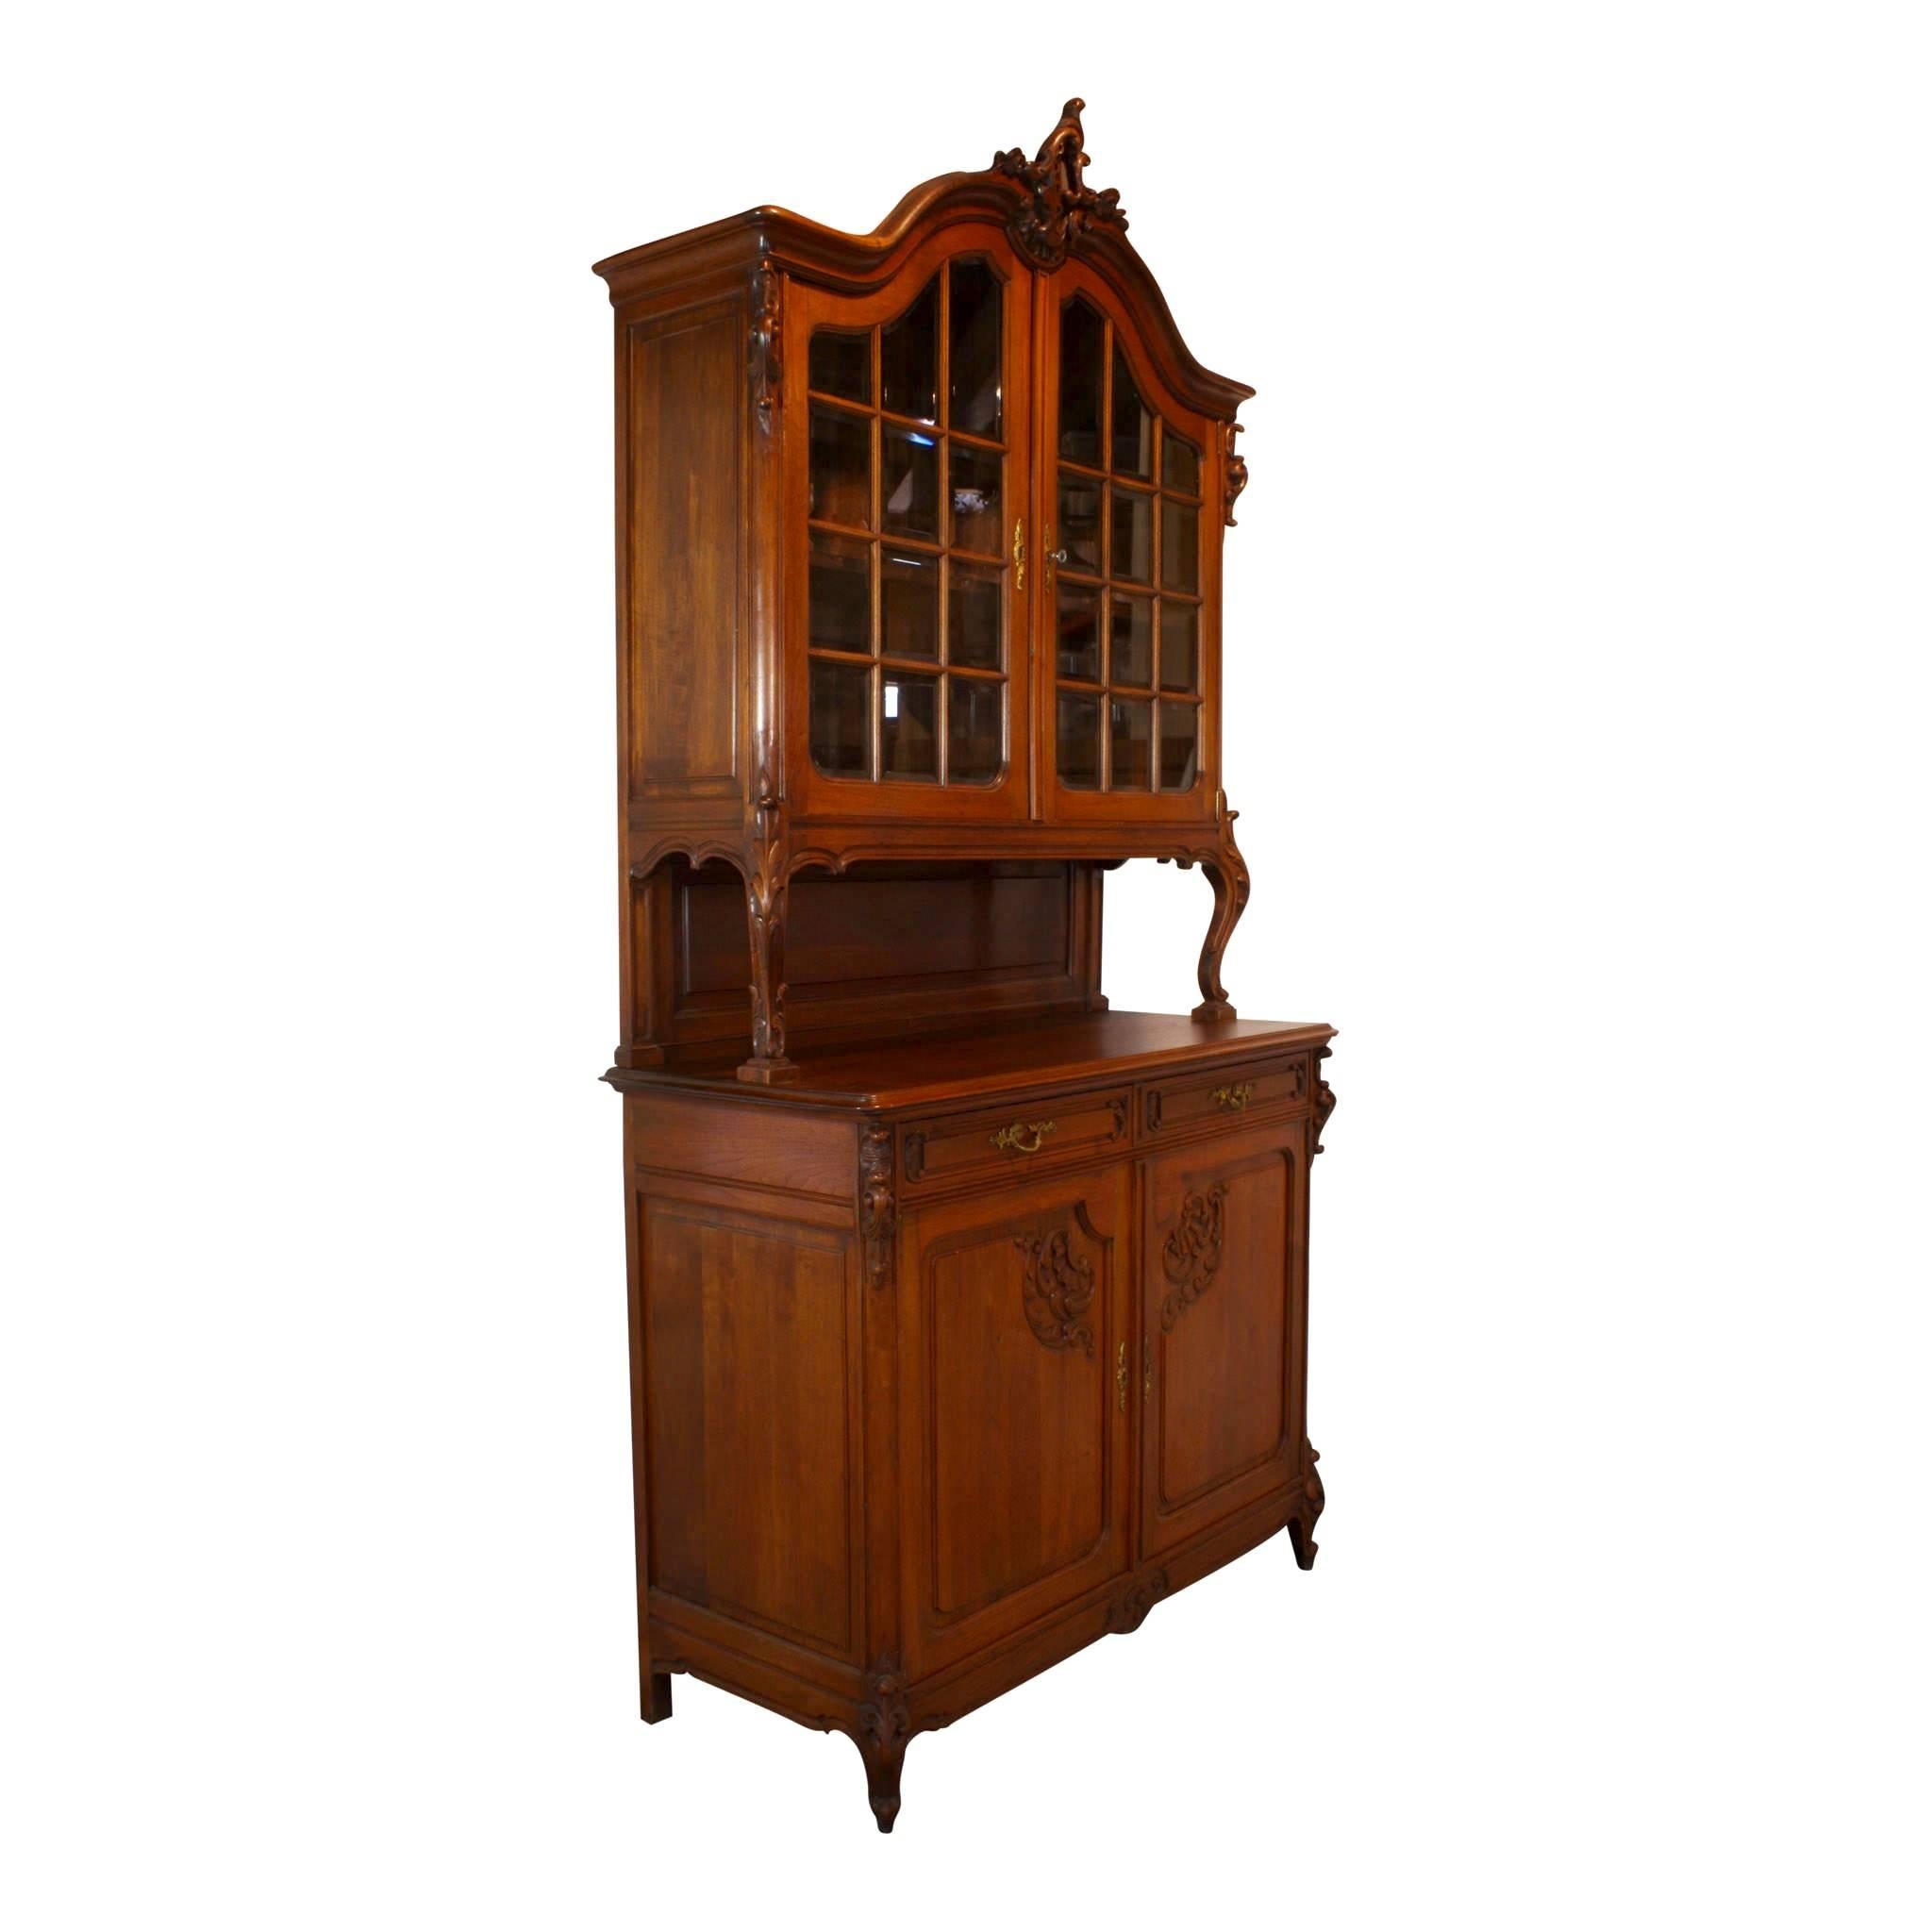 An arched cornice culminates in a beautifully foliated design incorporating flowers and ruffles with scrolled leaves atop this walnut china buffet. The arched, double doors with 24 beveled, glass panes in the upper gallery open to a fixed shelf. The